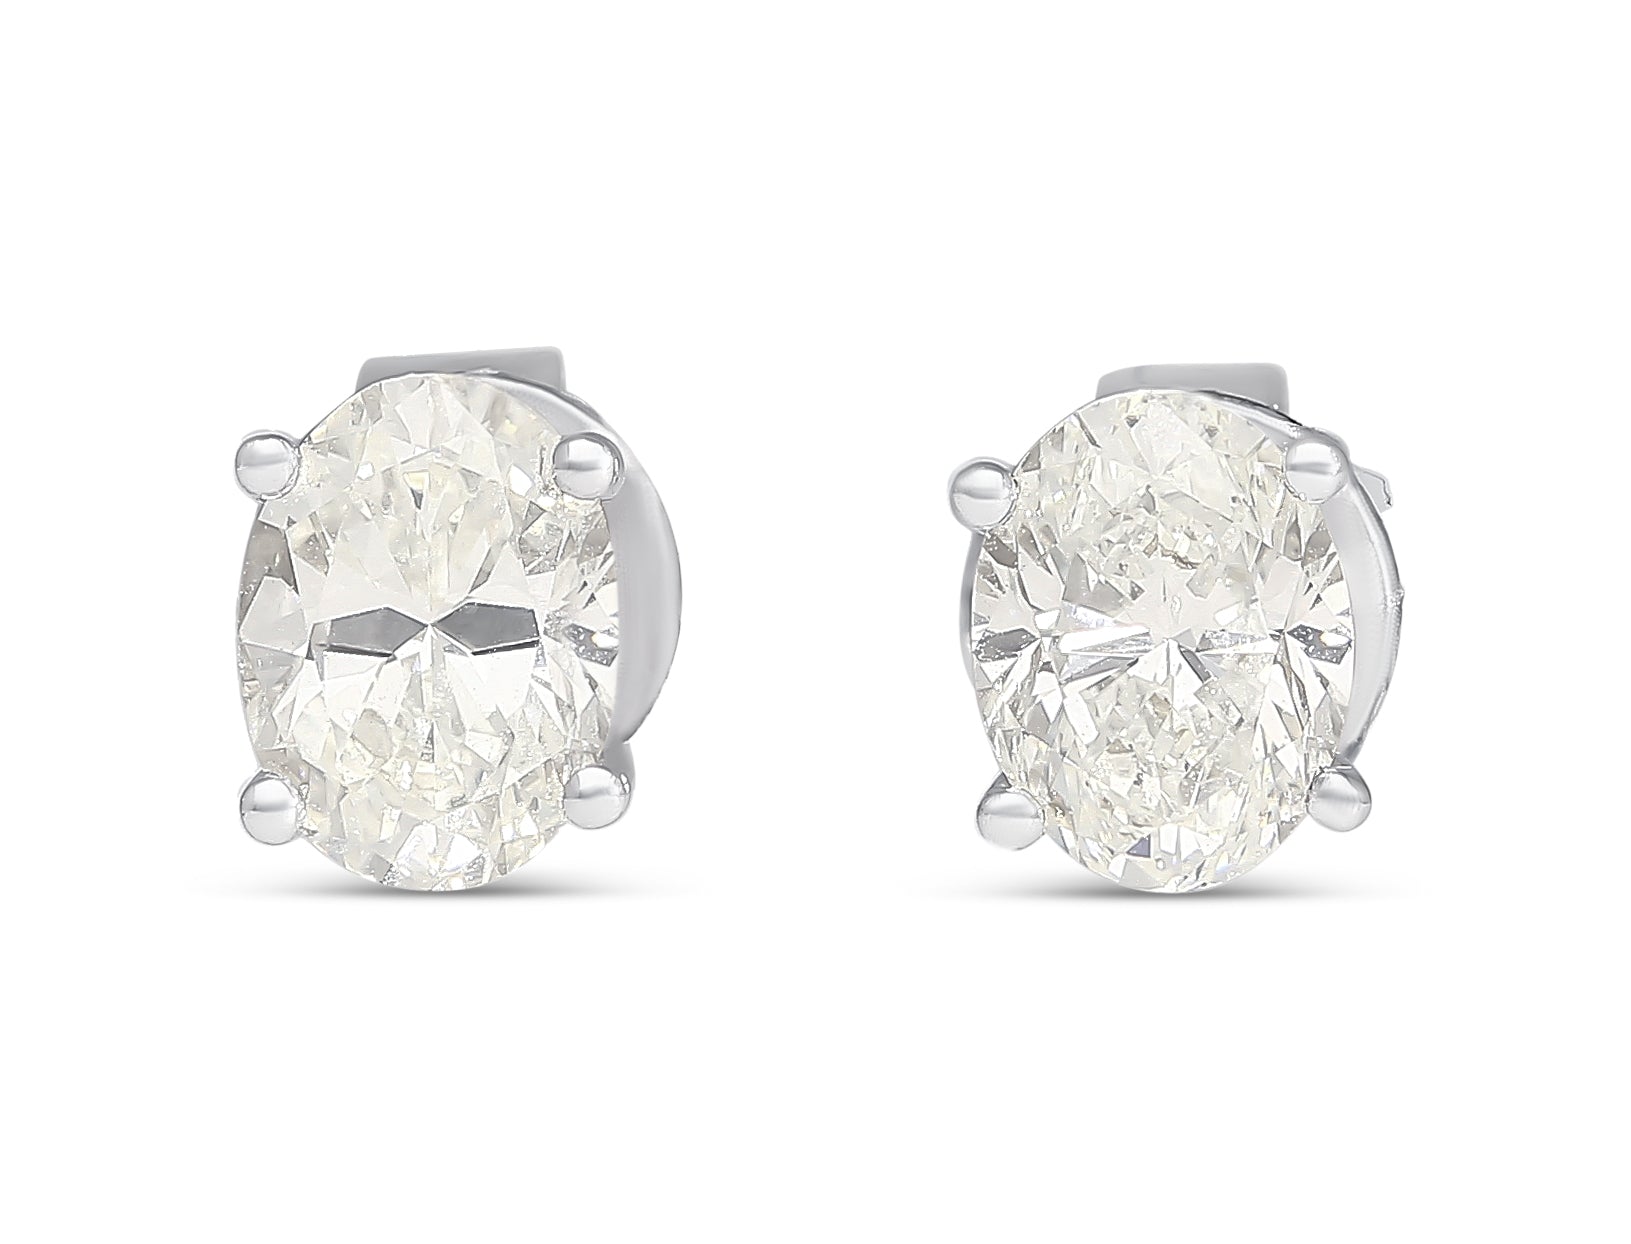 1 Carat Total Oval Cut 18K White Gold Solitaire 4-Prong Stud Earrings